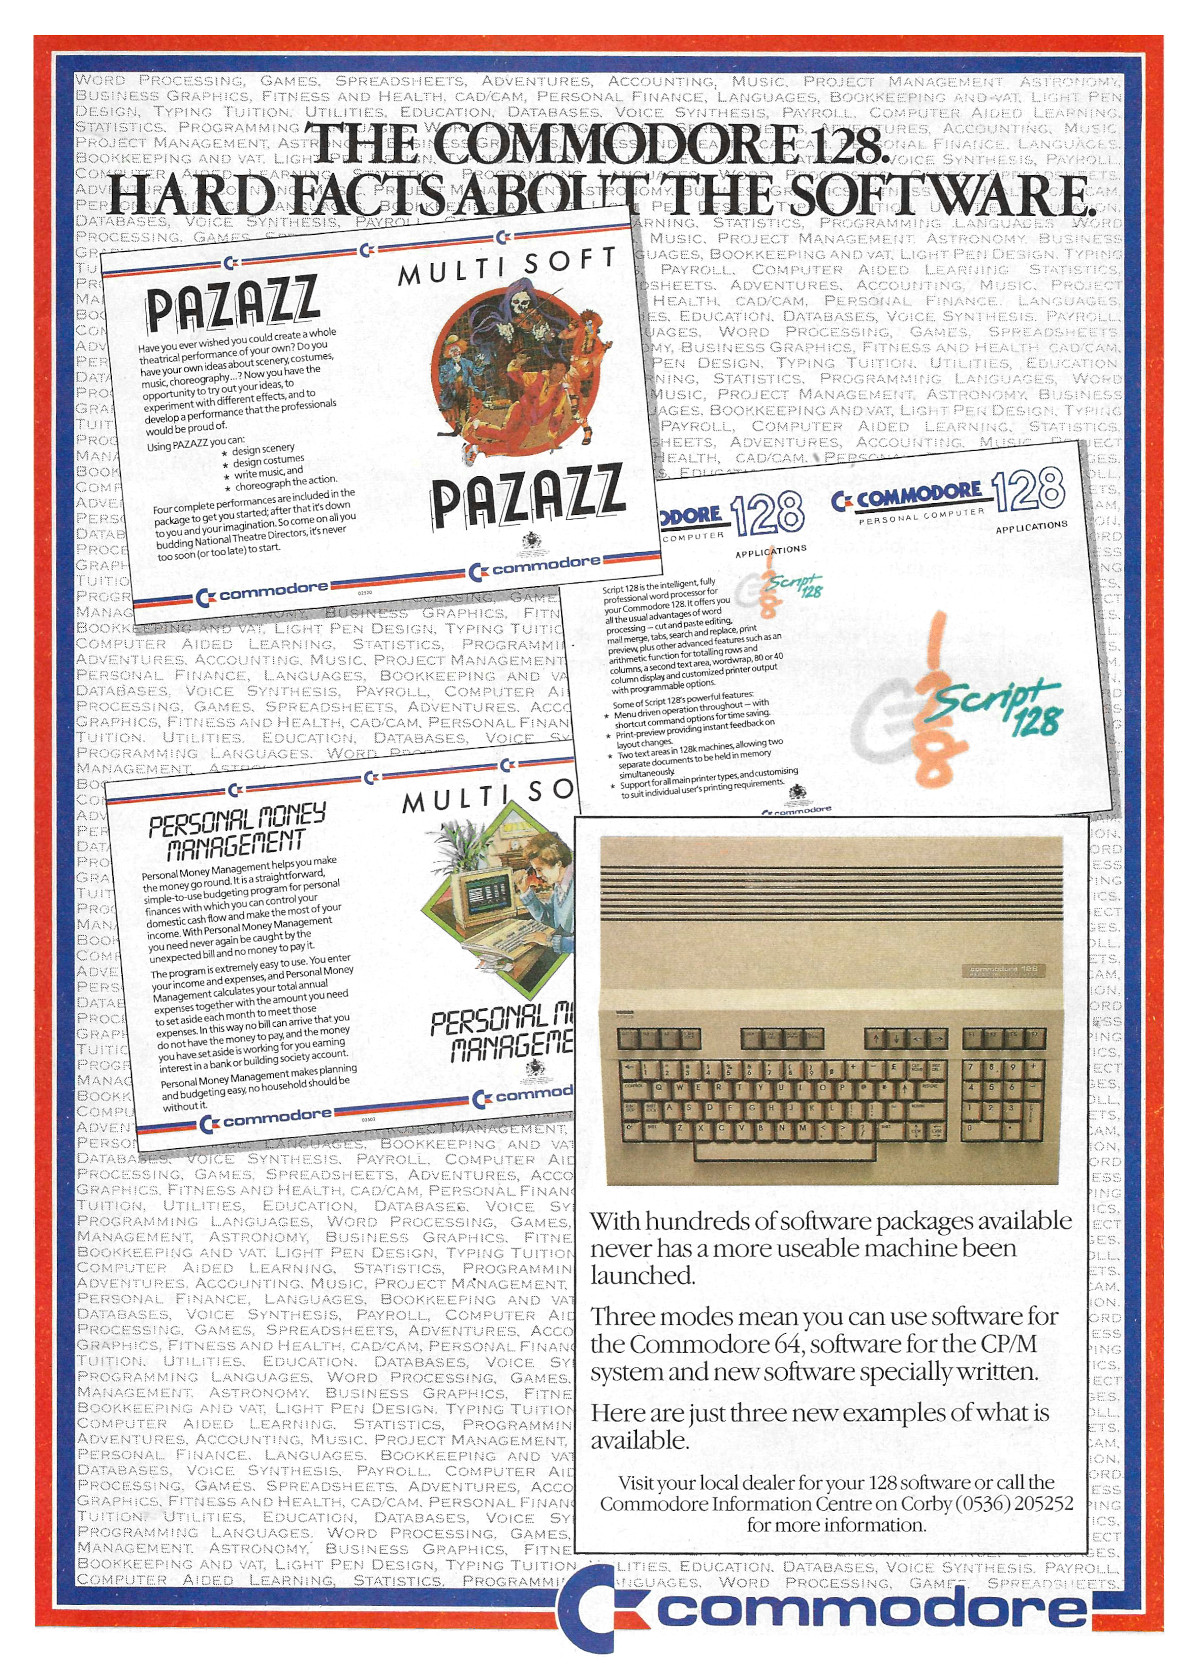 An advert for C128 software, running concurrently with the launch of the machine, highlighting the multiple modes available and reinforcing how much software is already available. From Your Computer, January 1986